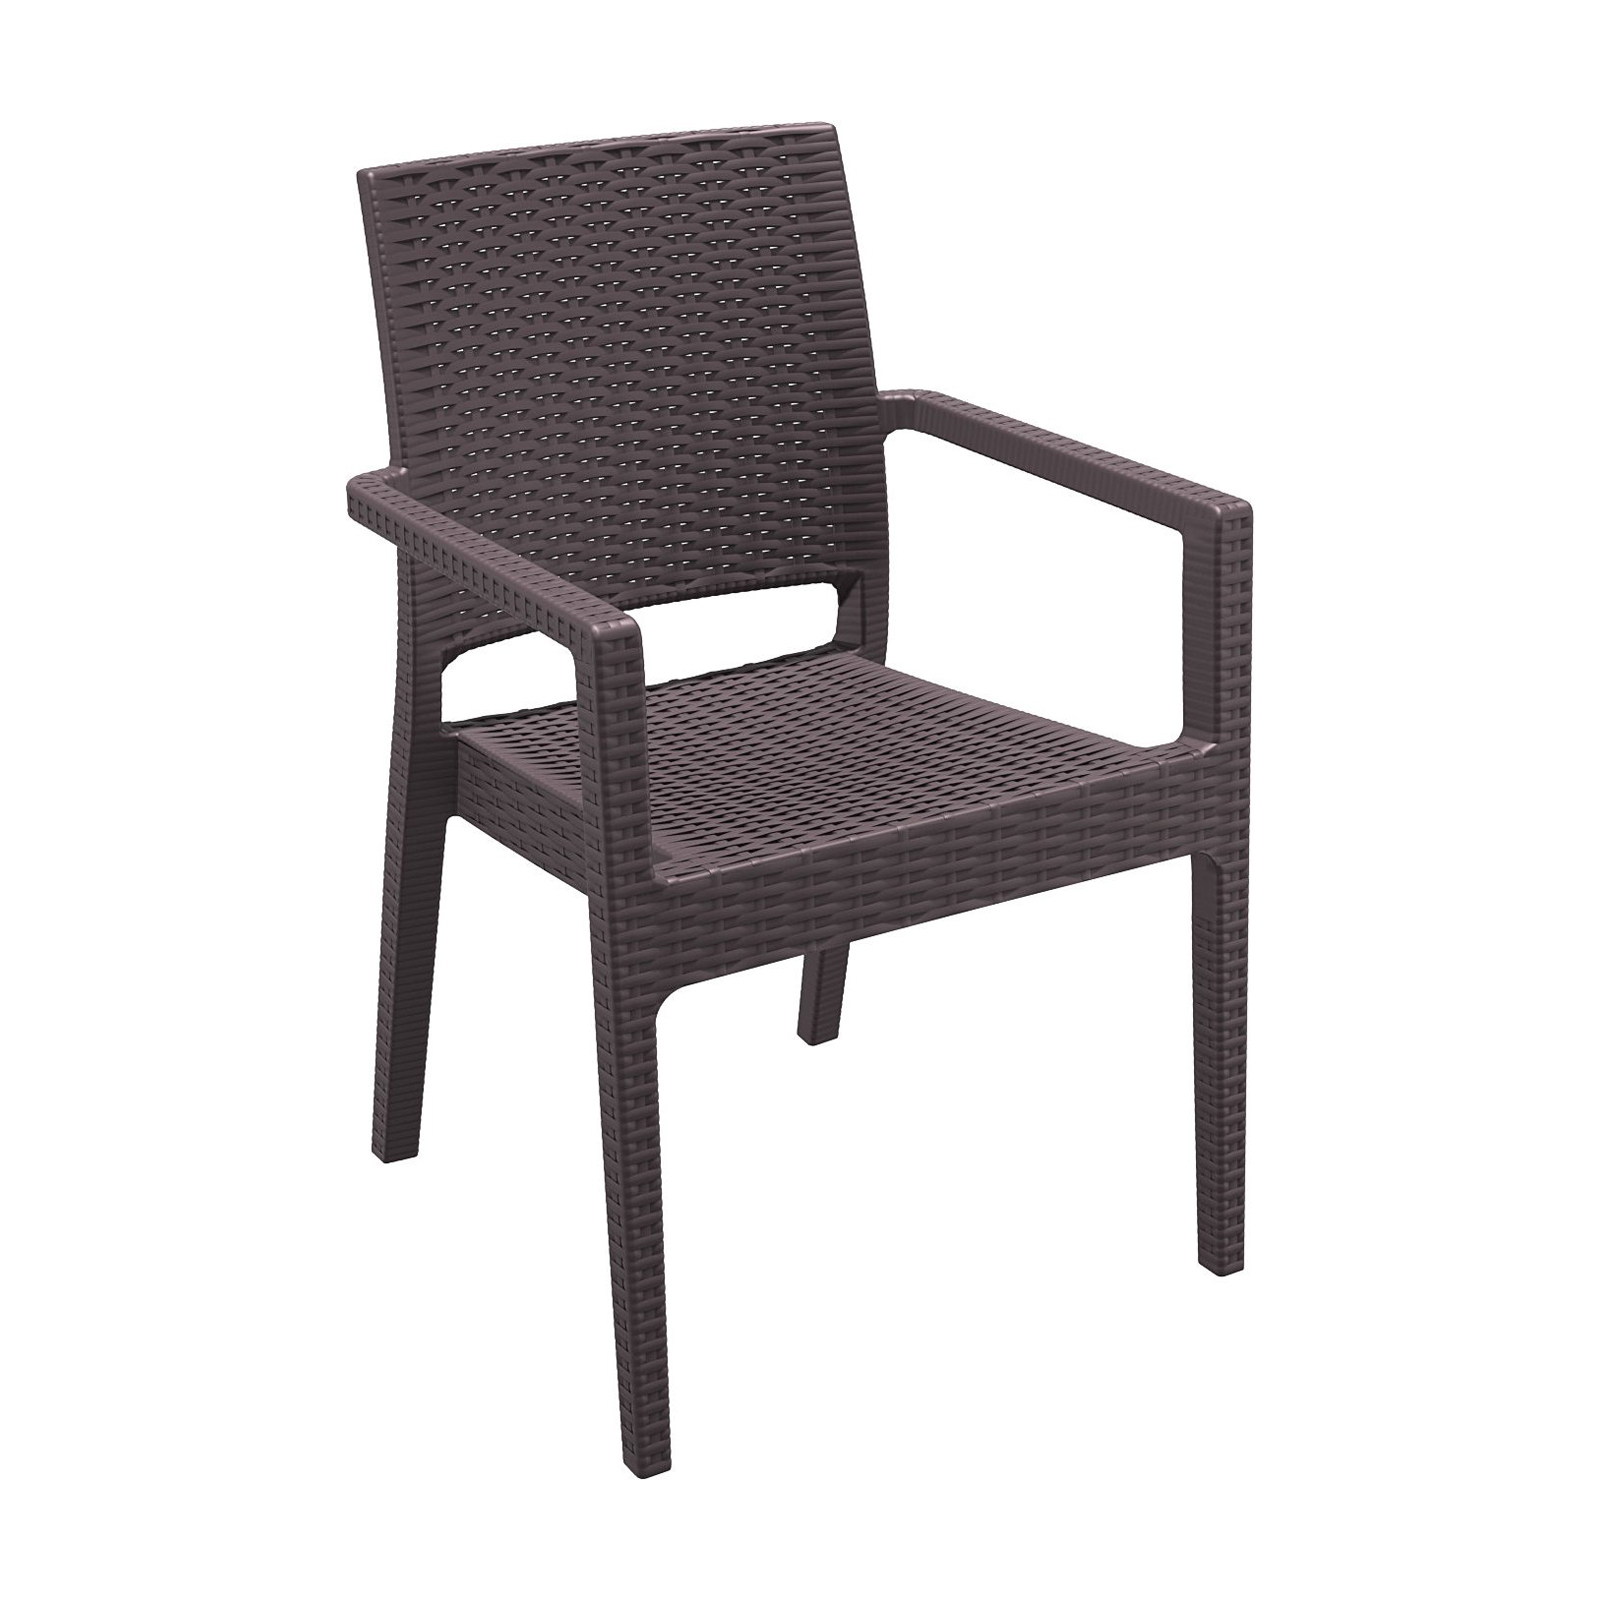 American Trading Company 810-3228 Ibiza Resin Ergonomic All-Weather Stackable Arm Chair, Expresso (Pack of 4)